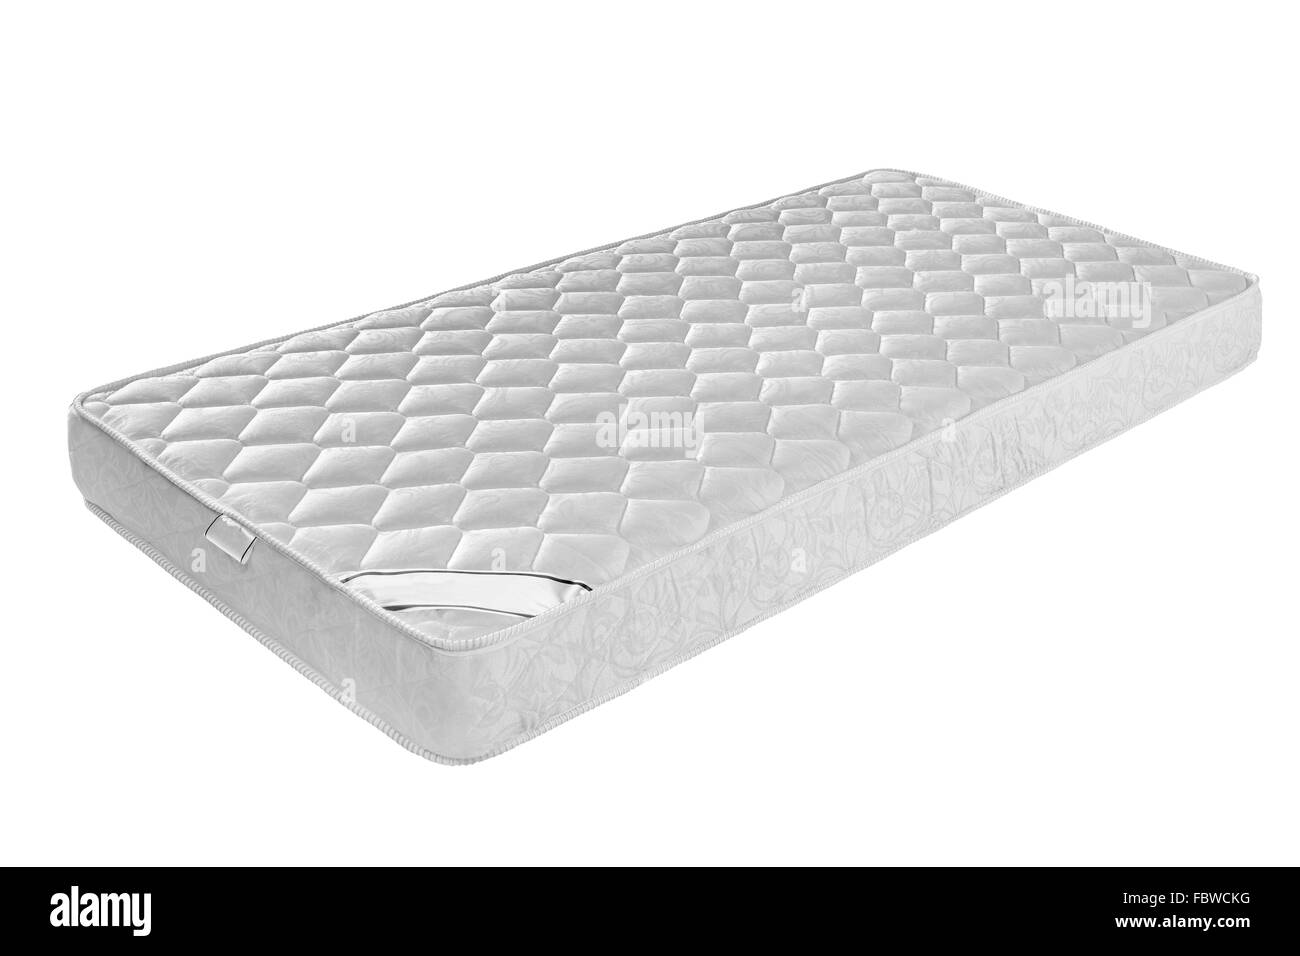 Mattress that supported you to sleep well all night isolated on white background Stock Photo